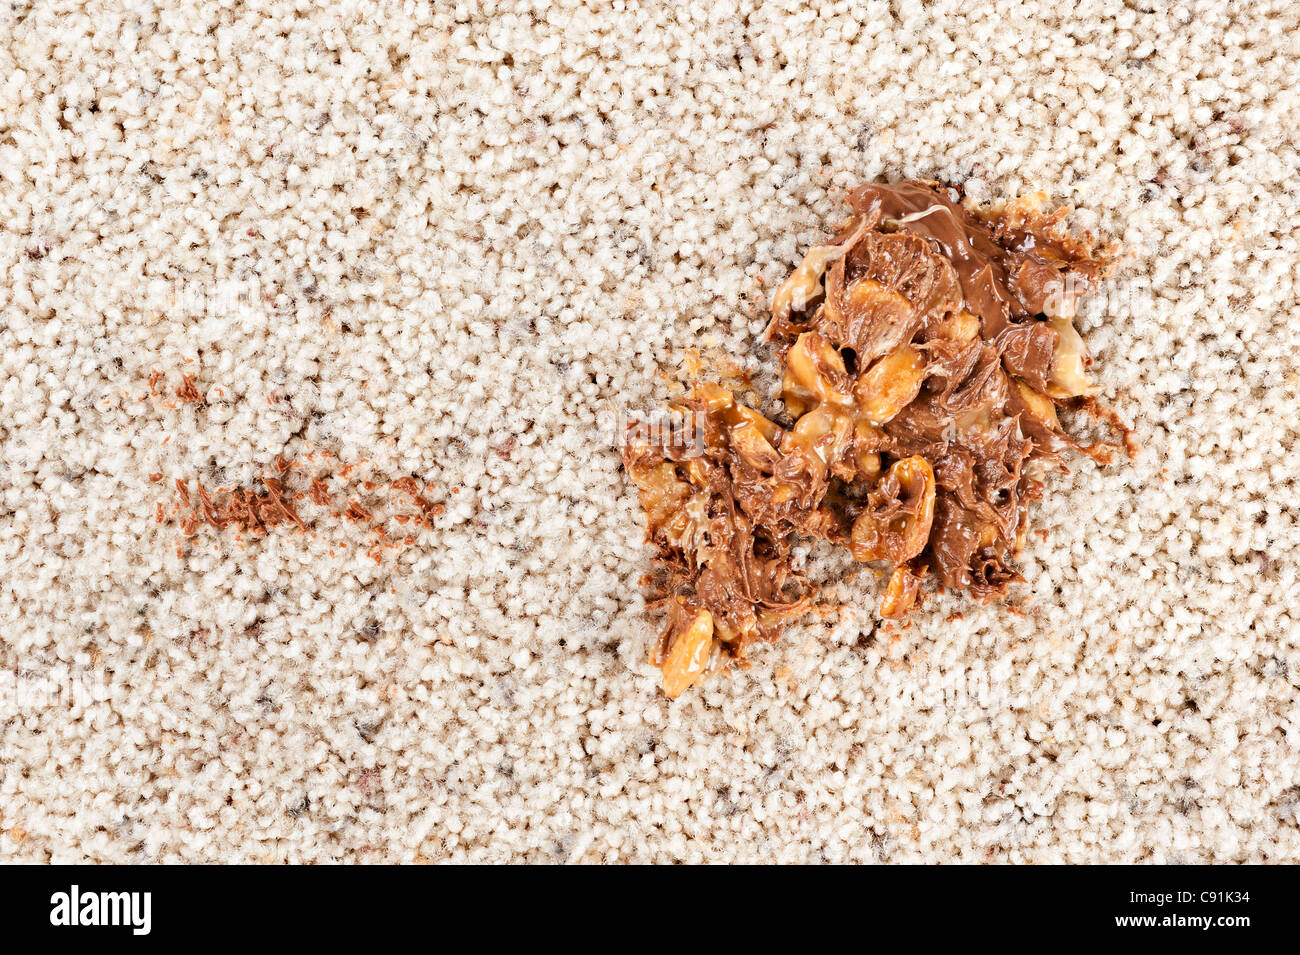 A gooey chocolate candy with caramel and nuts is melted and stuck to brand new carpeting. Stock Photo